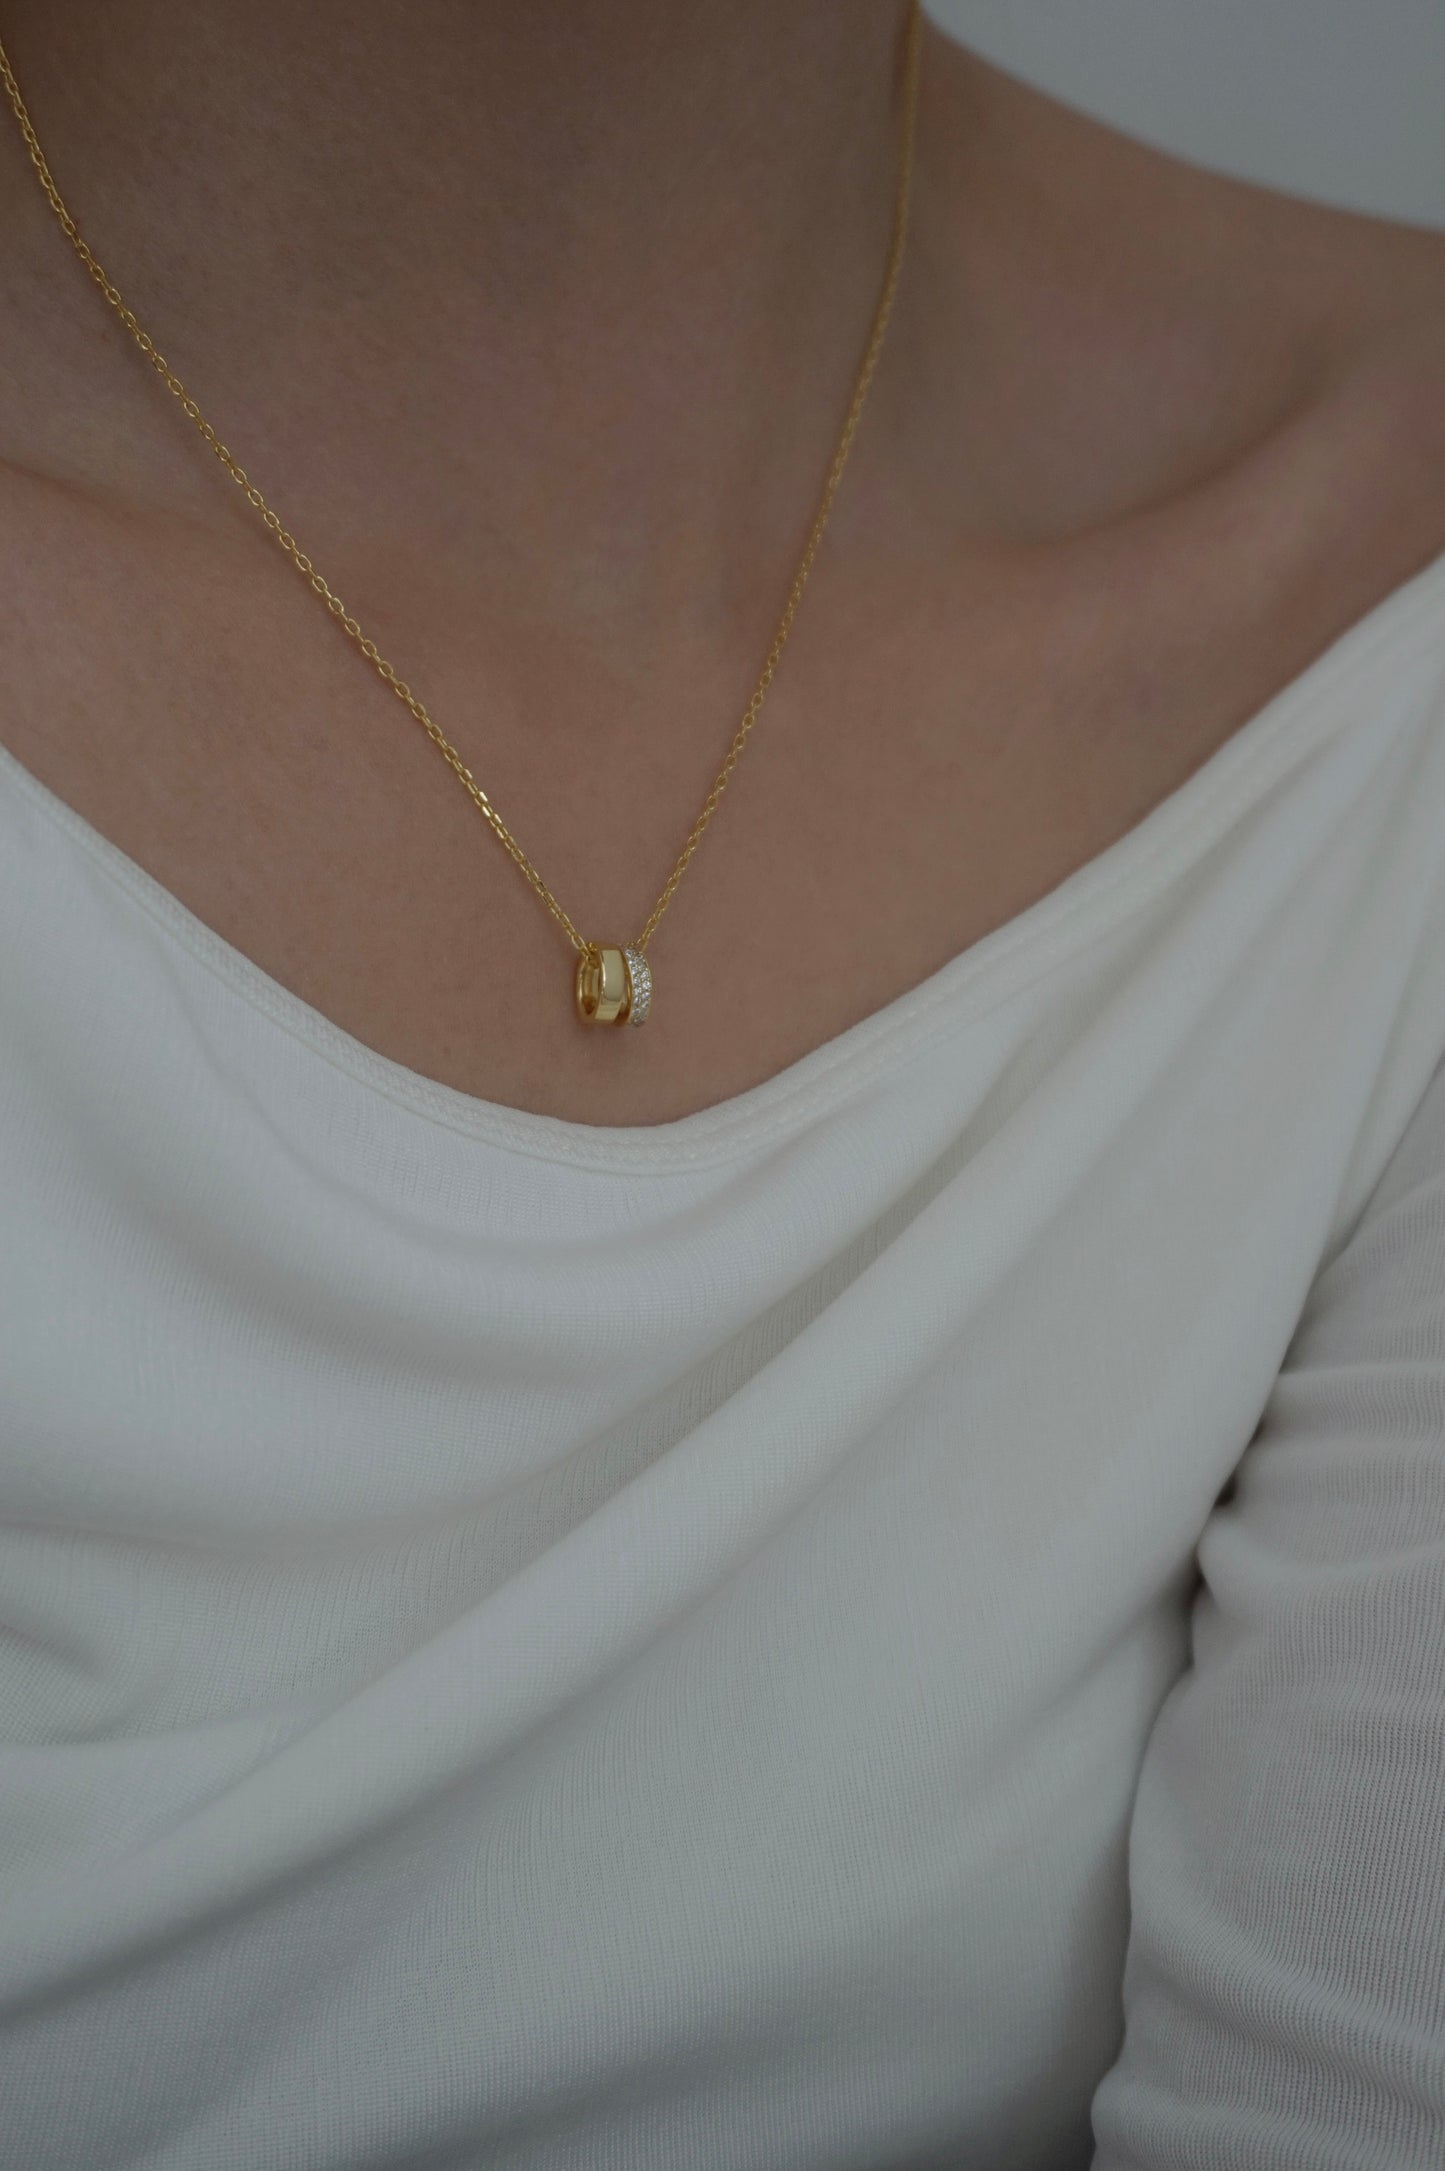 The Dainty Necklace